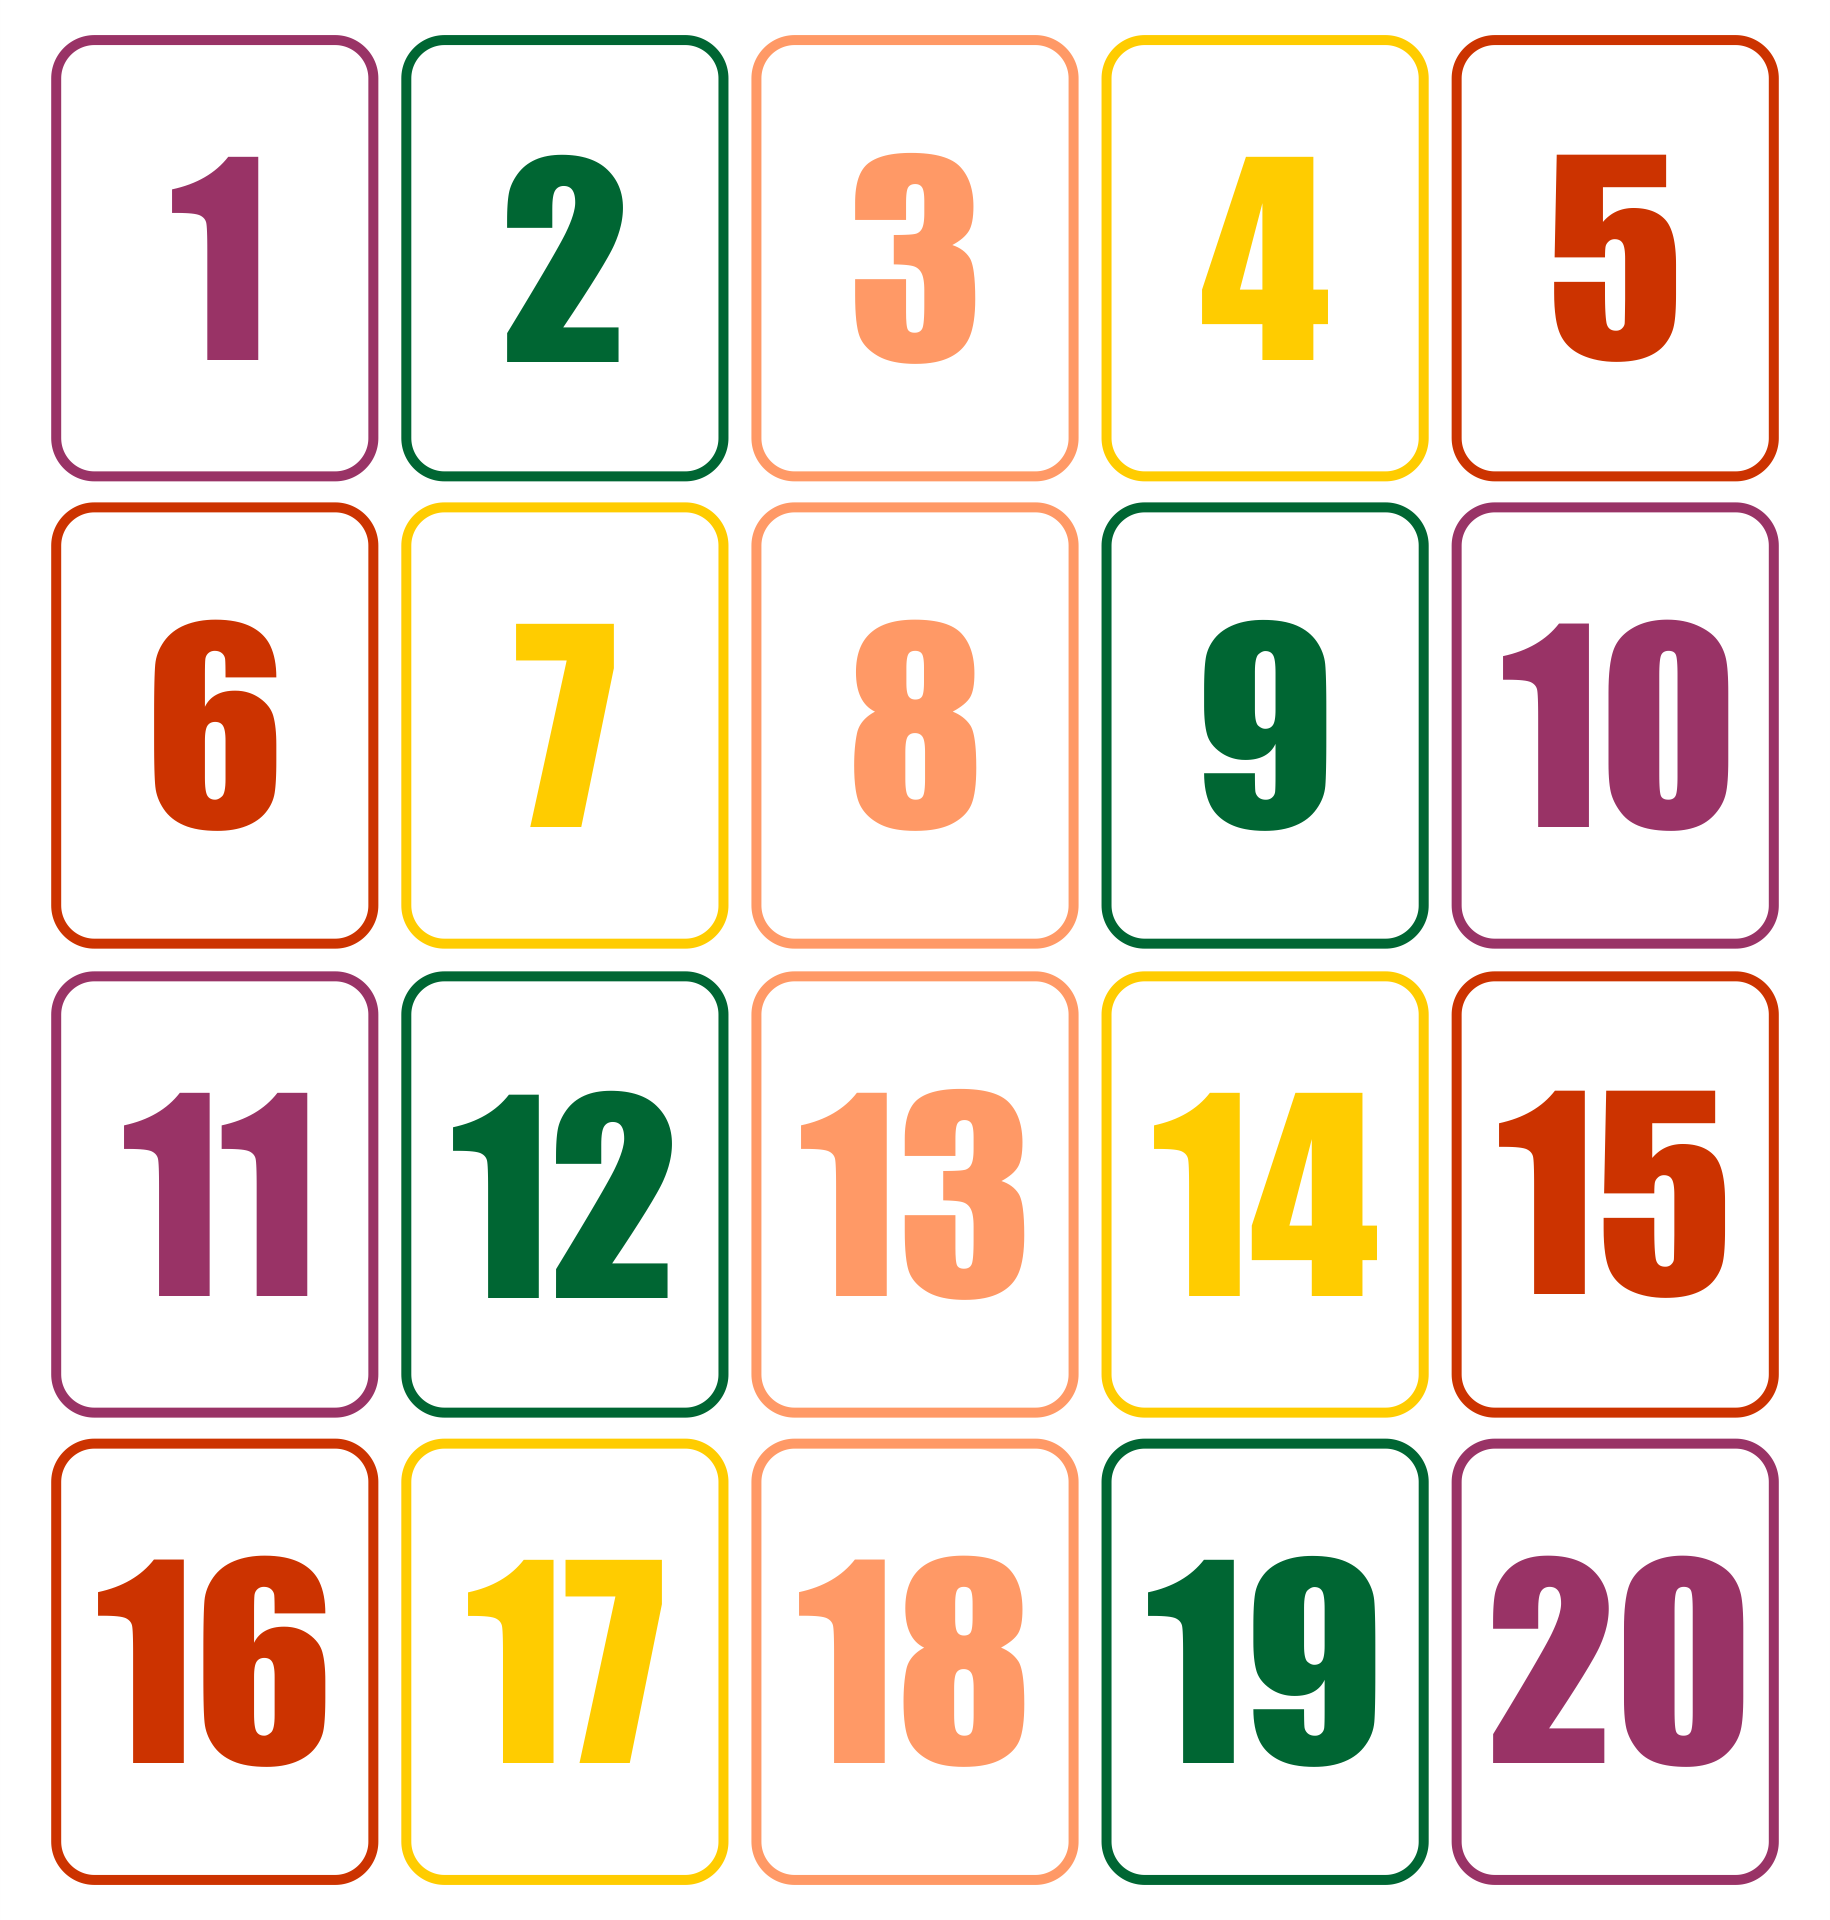 4-best-images-of-large-printable-number-cards-1-20-printable-number